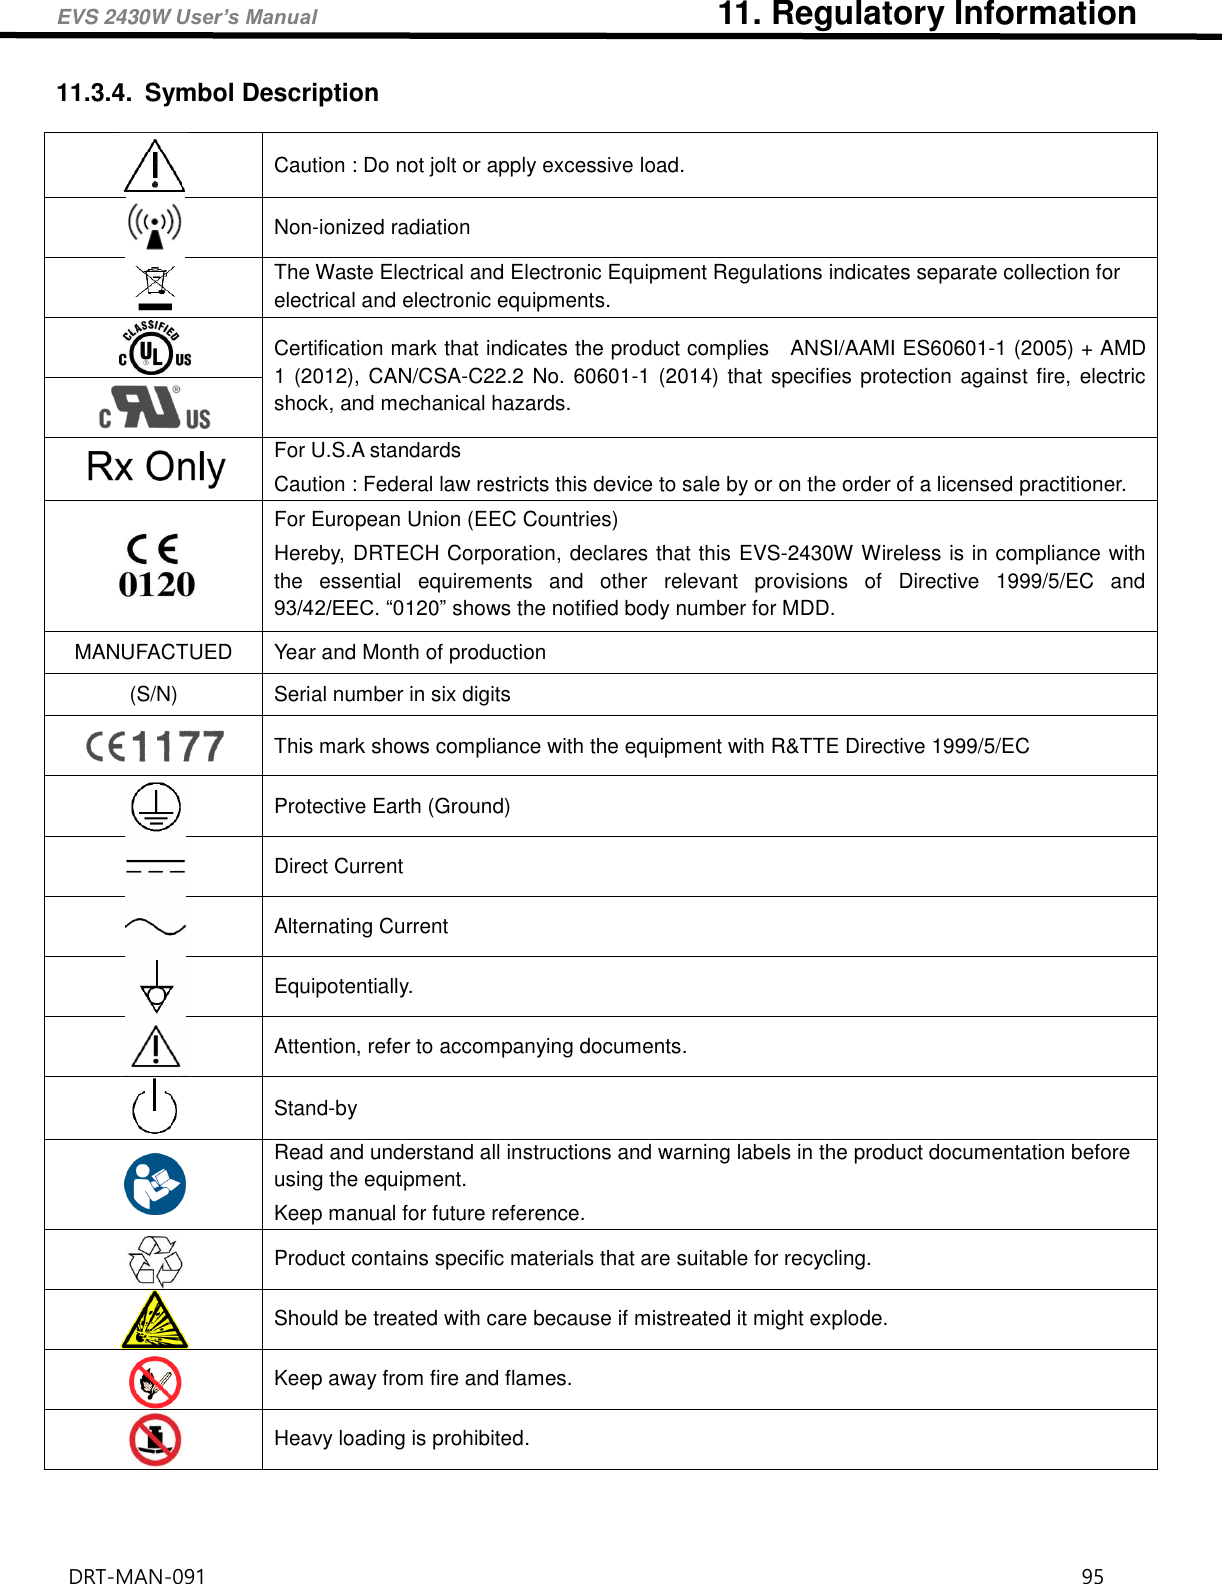 EVS 2430W User’s Manual                                                11. Regulatory Information DRT-MAN-091                                                                                    95   11.3.4.  Symbol Description  Caution : Do not jolt or apply excessive load.  Non-ionized radiation  The Waste Electrical and Electronic Equipment Regulations indicates separate collection for electrical and electronic equipments.  Certification mark that indicates the product complies   ANSI/AAMI ES60601-1 (2005) + AMD 1 (2012), CAN/CSA-C22.2 No. 60601-1 (2014) that specifies protection against fire, electric shock, and mechanical hazards.   For U.S.A standards Caution : Federal law restricts this device to sale by or on the order of a licensed practitioner.  For European Union (EEC Countries) Hereby, DRTECH Corporation, declares that this EVS-2430W Wireless is in compliance with the  essential  equirements  and  other  relevant  provisions  of  Directive  1999/5/EC  and 93/42/EEC. “0120” shows the notified body number for MDD. MANUFACTUED Year and Month of production (S/N) Serial number in six digits  This mark shows compliance with the equipment with R&amp;TTE Directive 1999/5/EC    Protective Earth (Ground)  Direct Current  Alternating Current  Equipotentially.  Attention, refer to accompanying documents.  Stand-by  Read and understand all instructions and warning labels in the product documentation before using the equipment.   Keep manual for future reference.  Product contains specific materials that are suitable for recycling.  Should be treated with care because if mistreated it might explode.  Keep away from fire and flames.  Heavy loading is prohibited.    